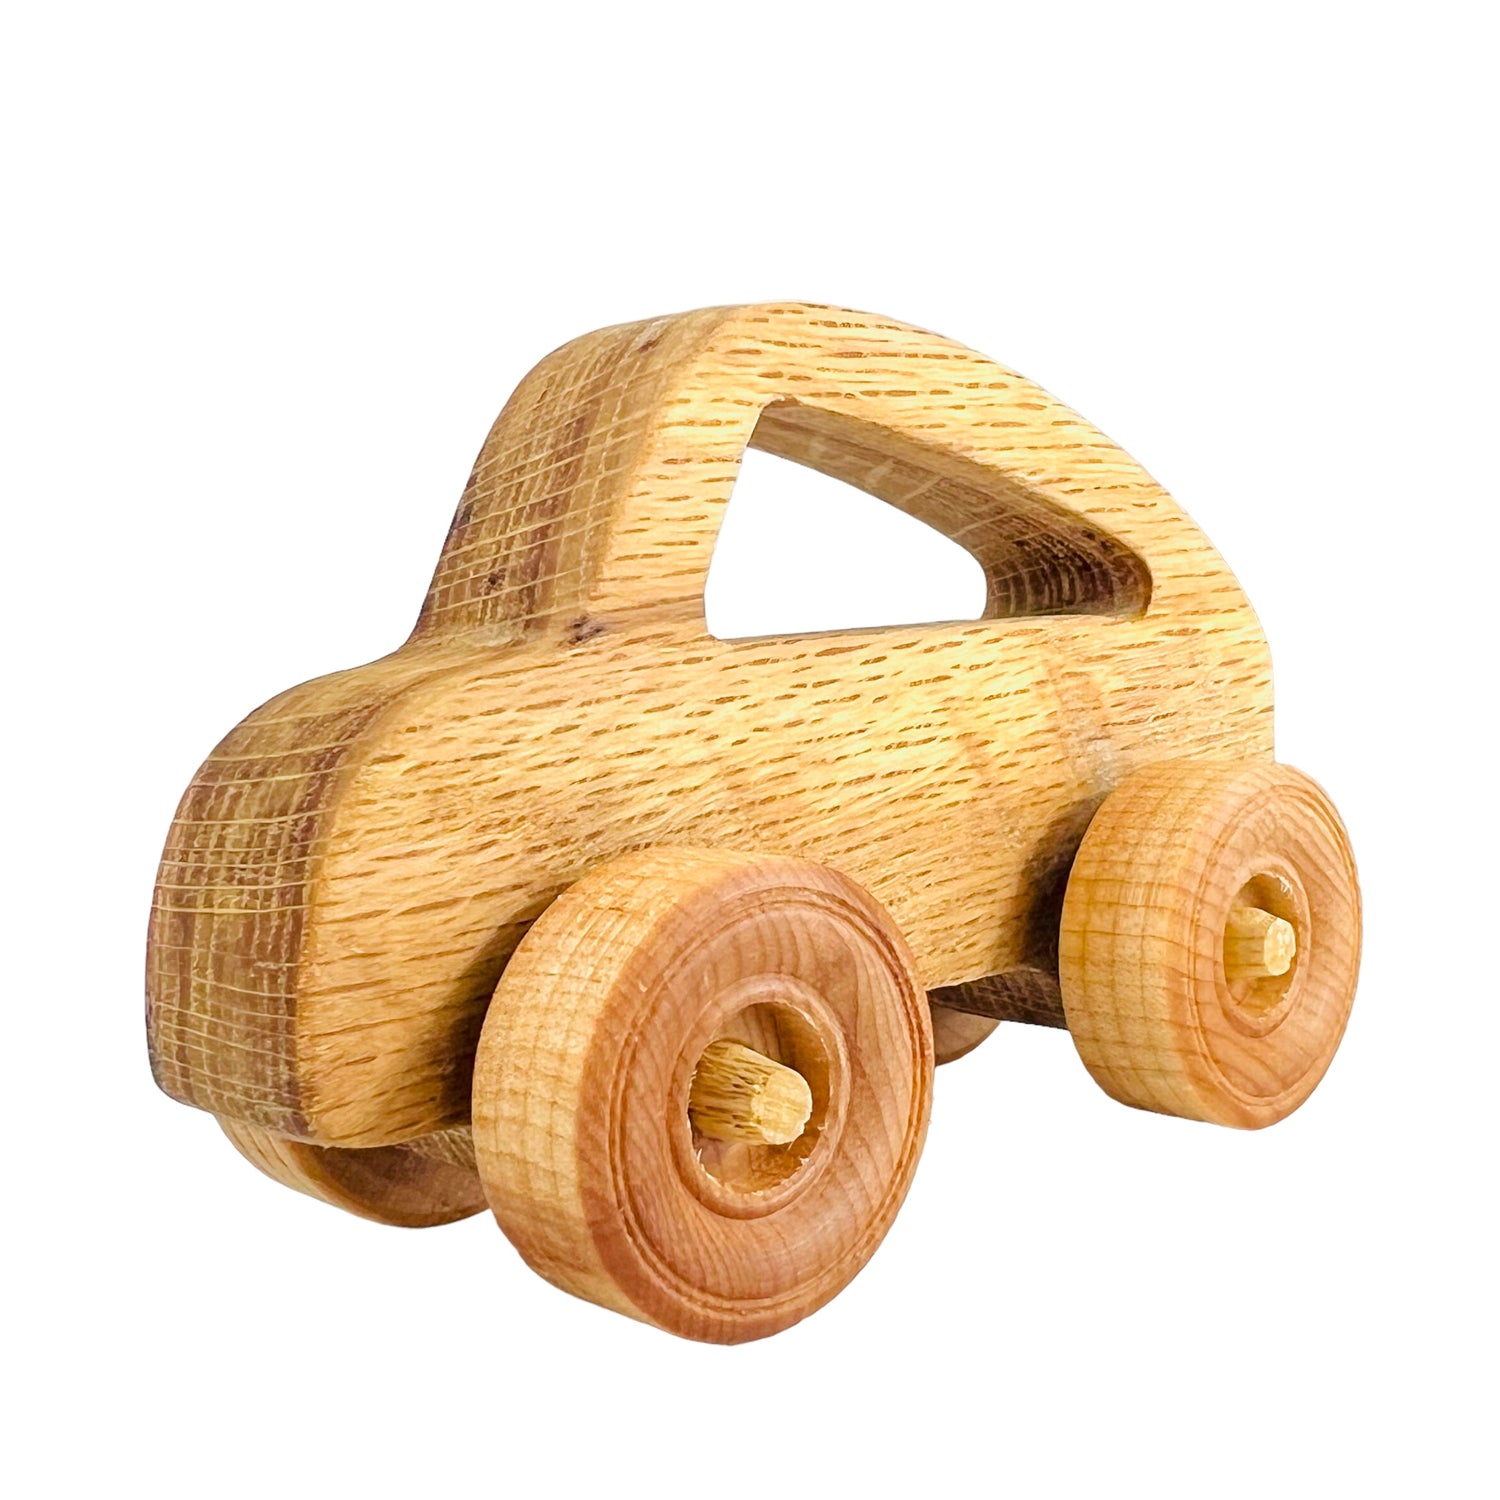 Wooden Toy - City Car